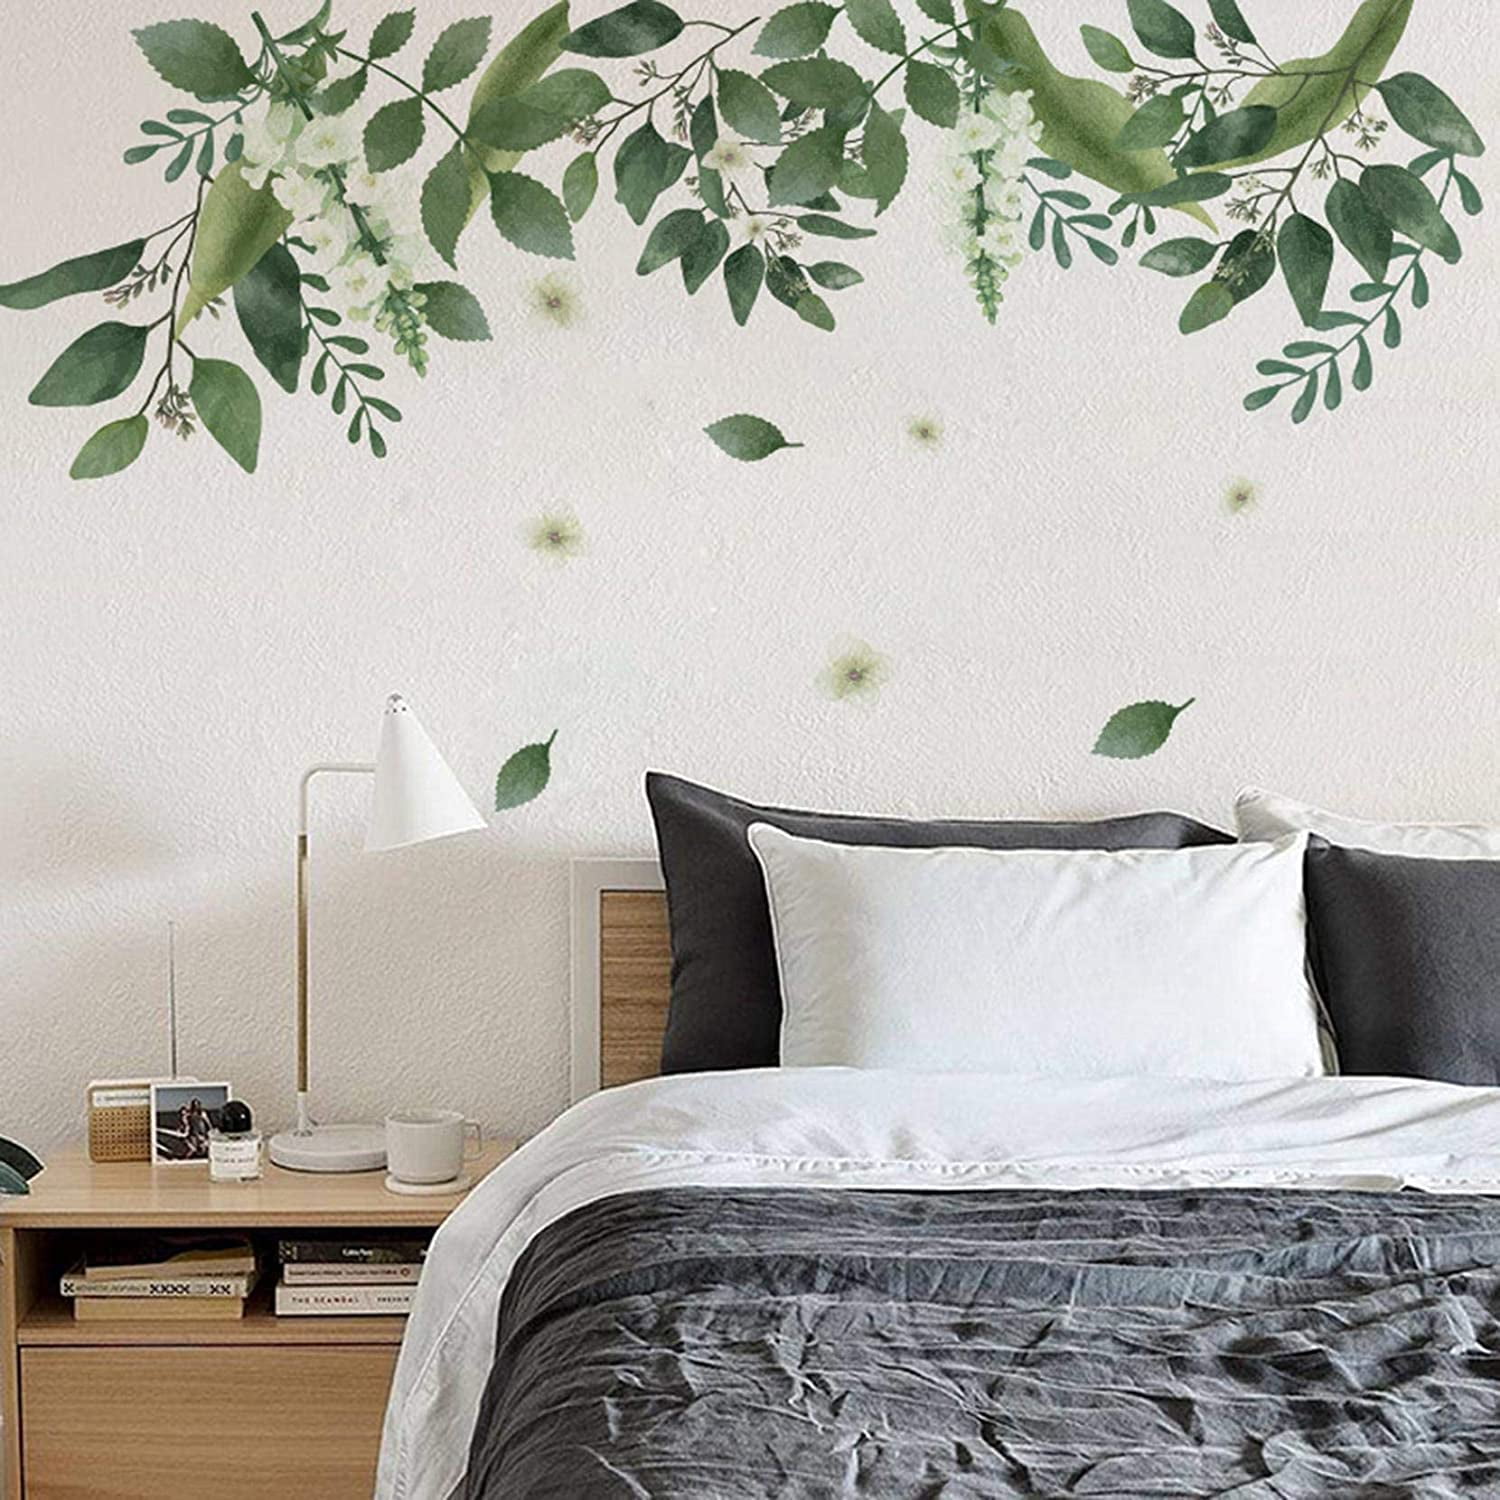 Pianpianzi Living Room Wall Mirrors Decorations Decorative Letters for  Shelf Vintage Things Stickers Green Leaves Wall Decal Wall Decals Fresh  Leaves